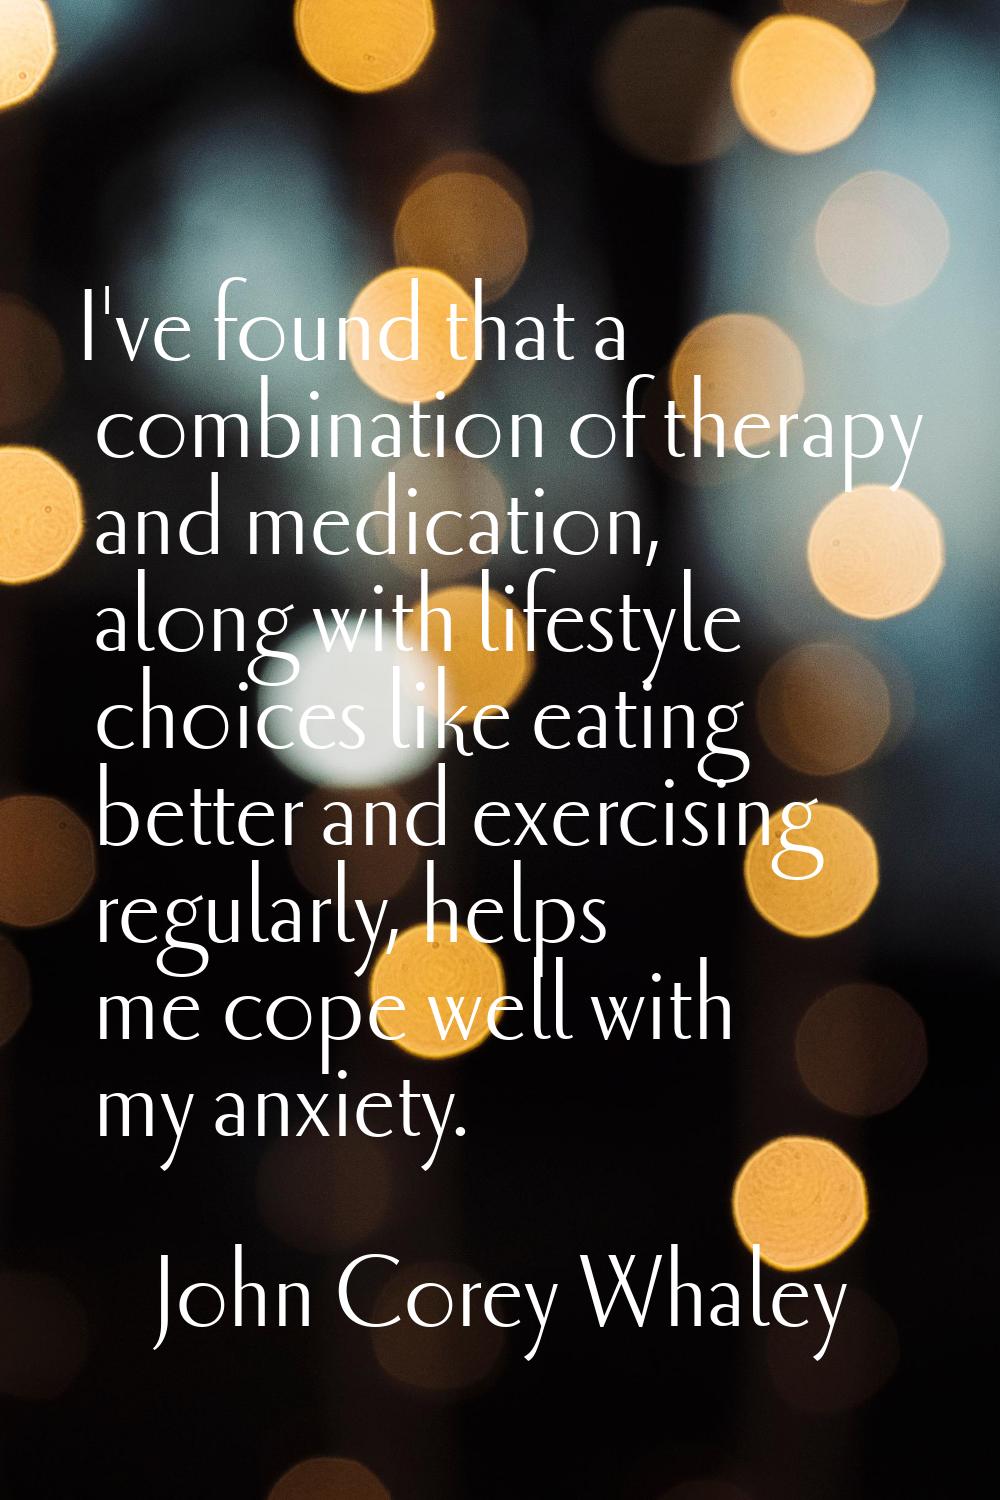 I've found that a combination of therapy and medication, along with lifestyle choices like eating b